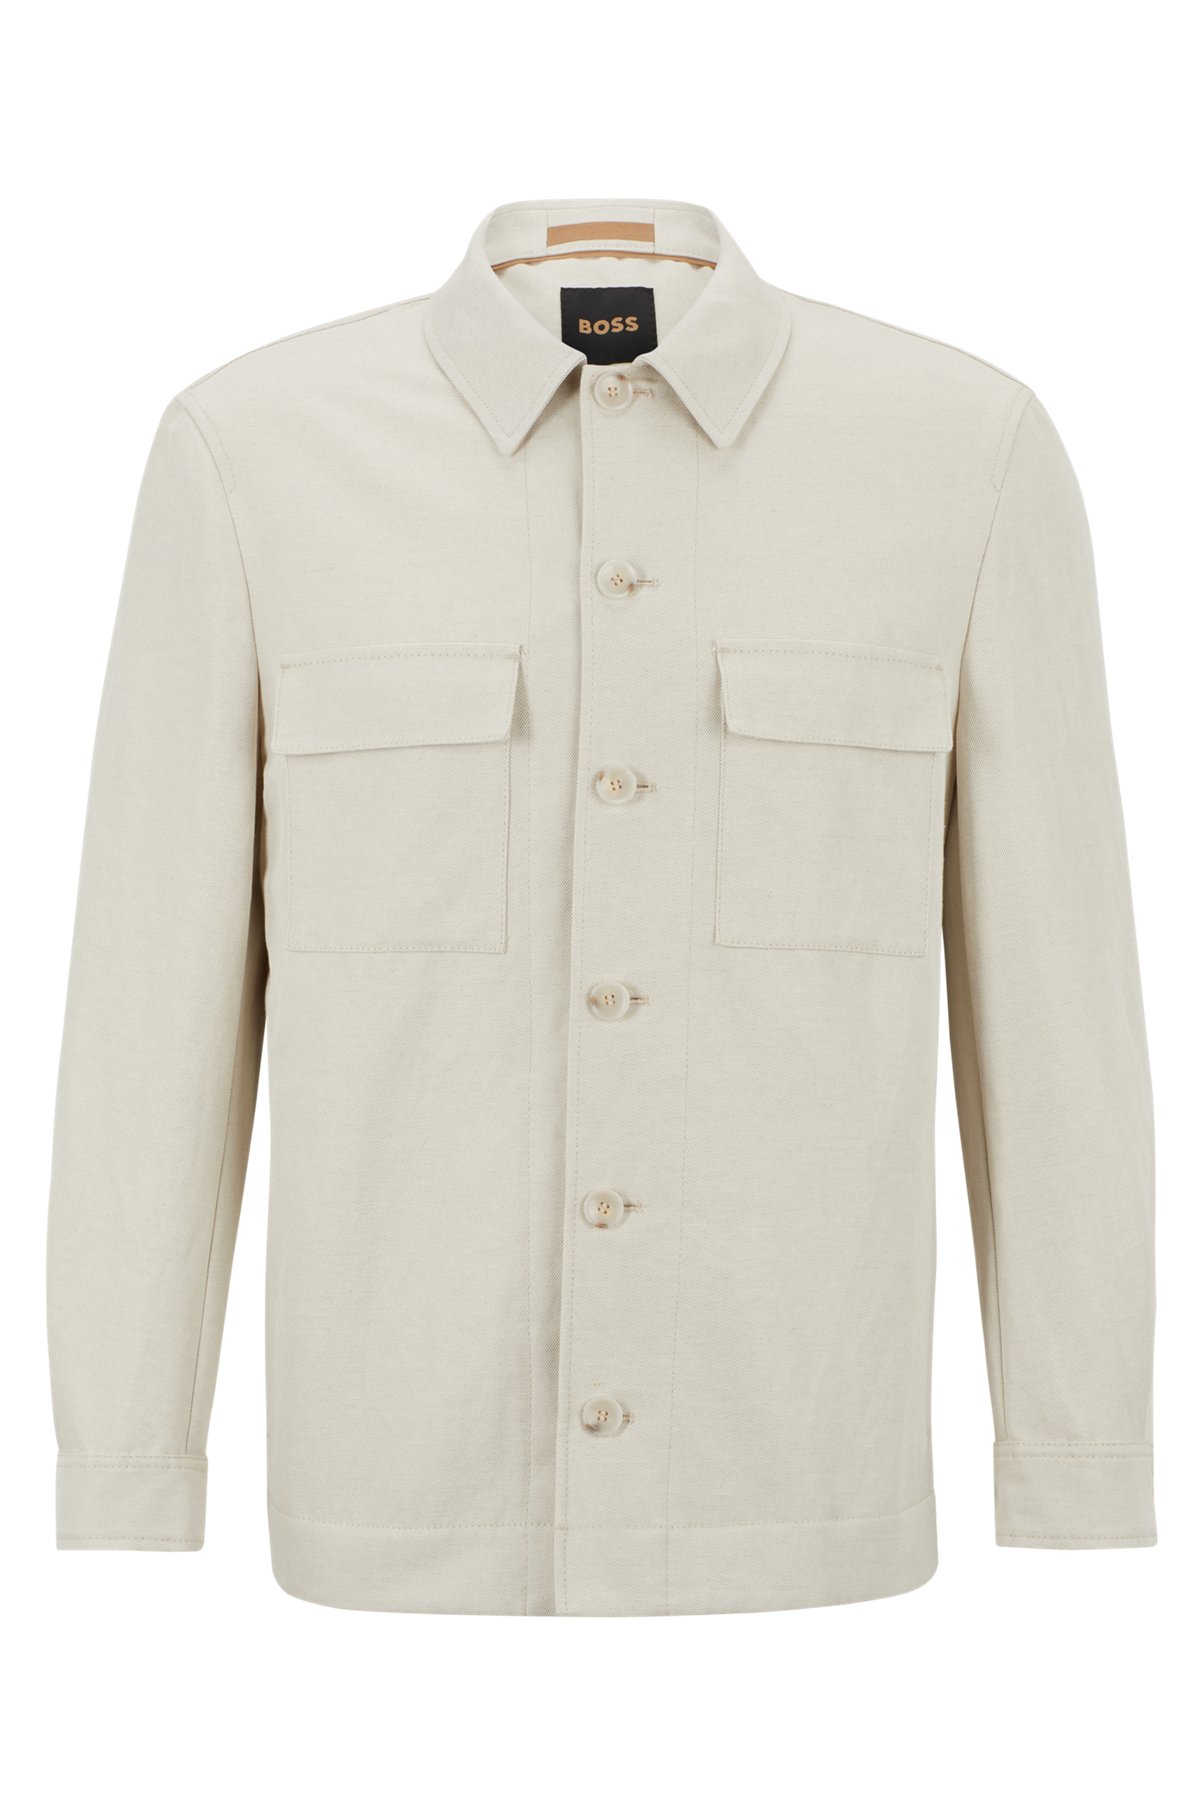 Relaxed-fit jacket in cotton and linen